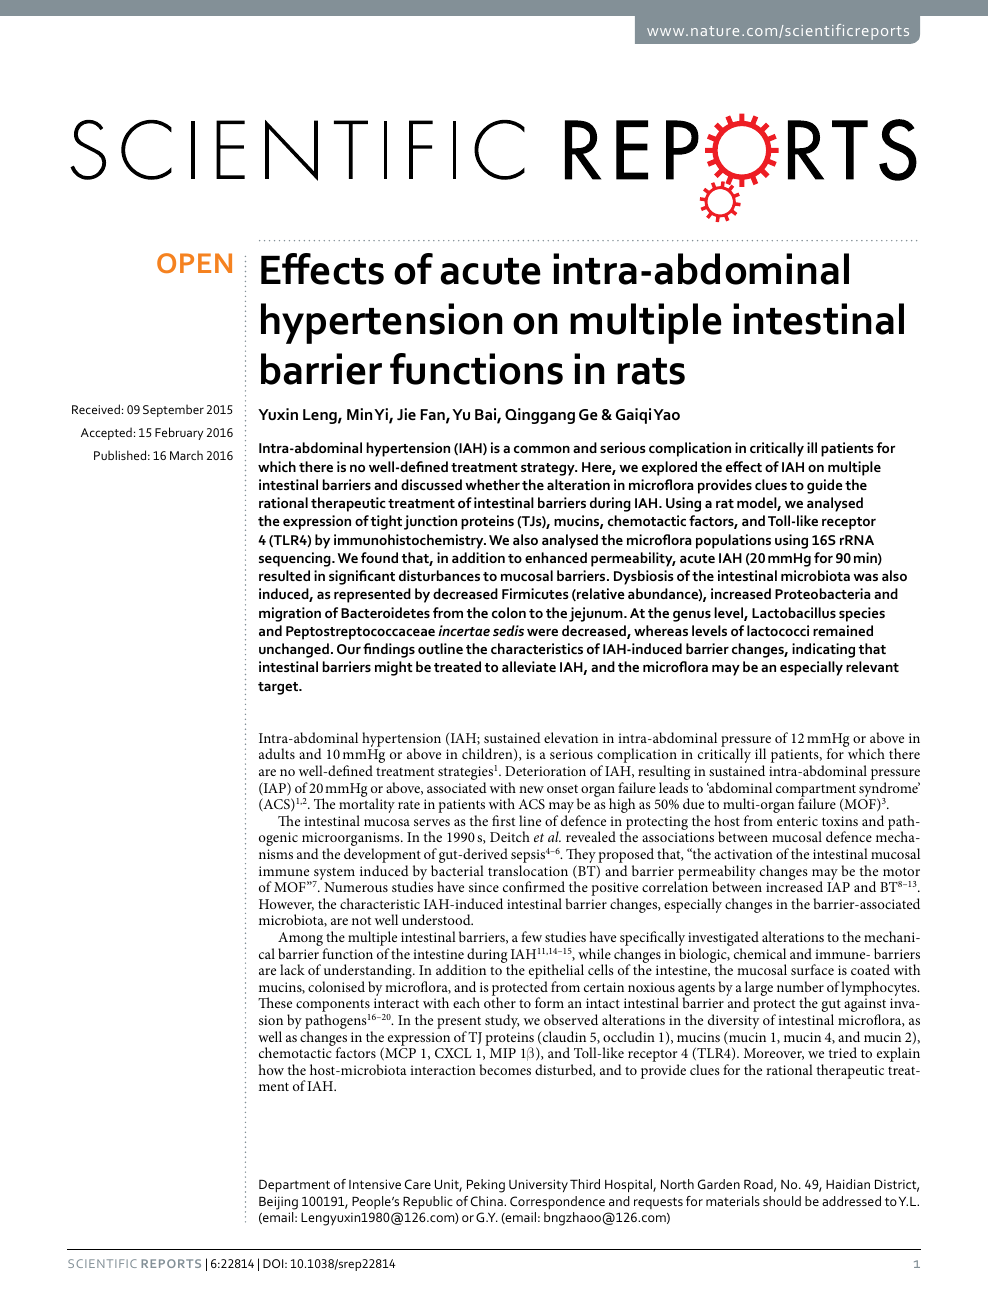 Effects Of Acute Intra Abdominal Hypertension On Multiple